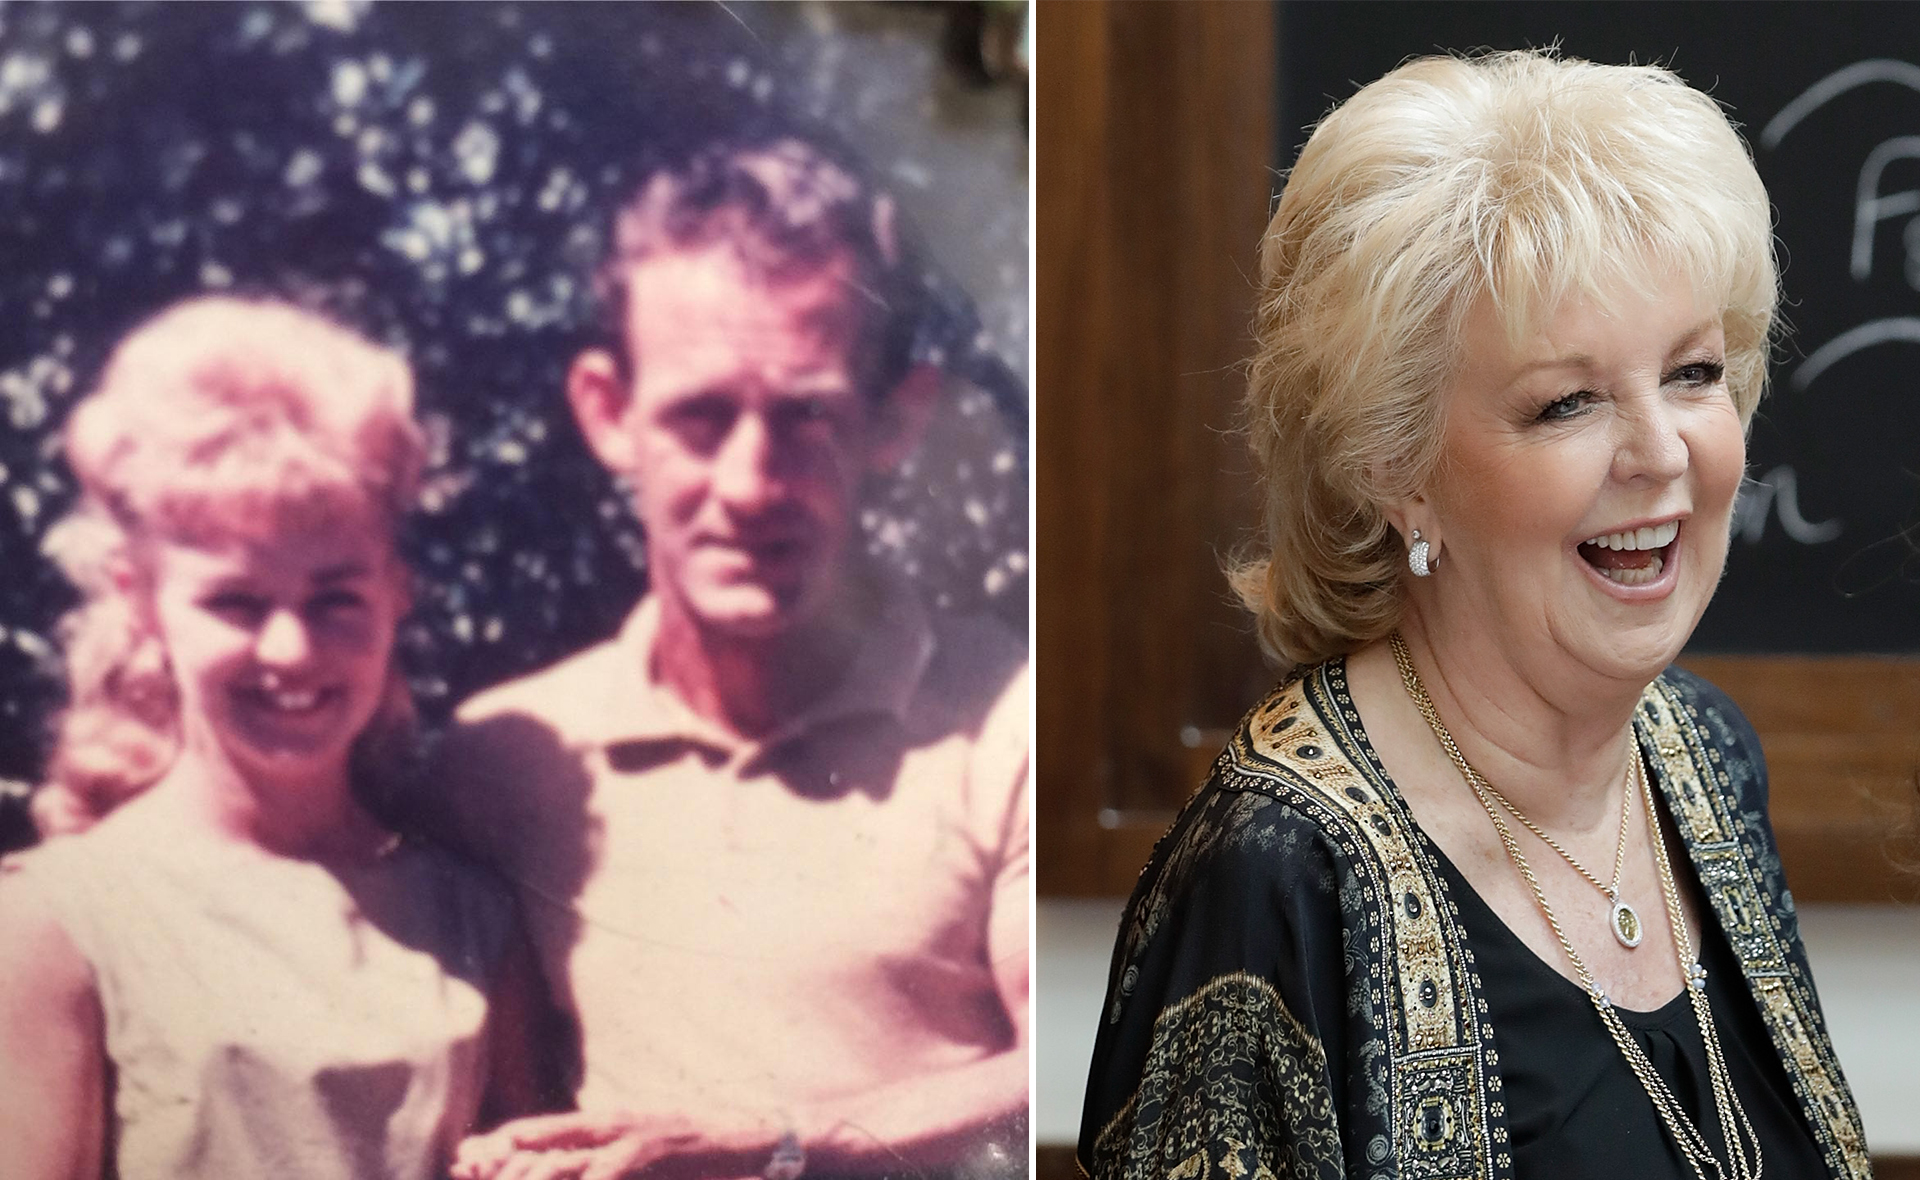 “Hope you’re up there looking after my Bert”: Patti Newton’s bittersweet message on anniversary of a painful loss